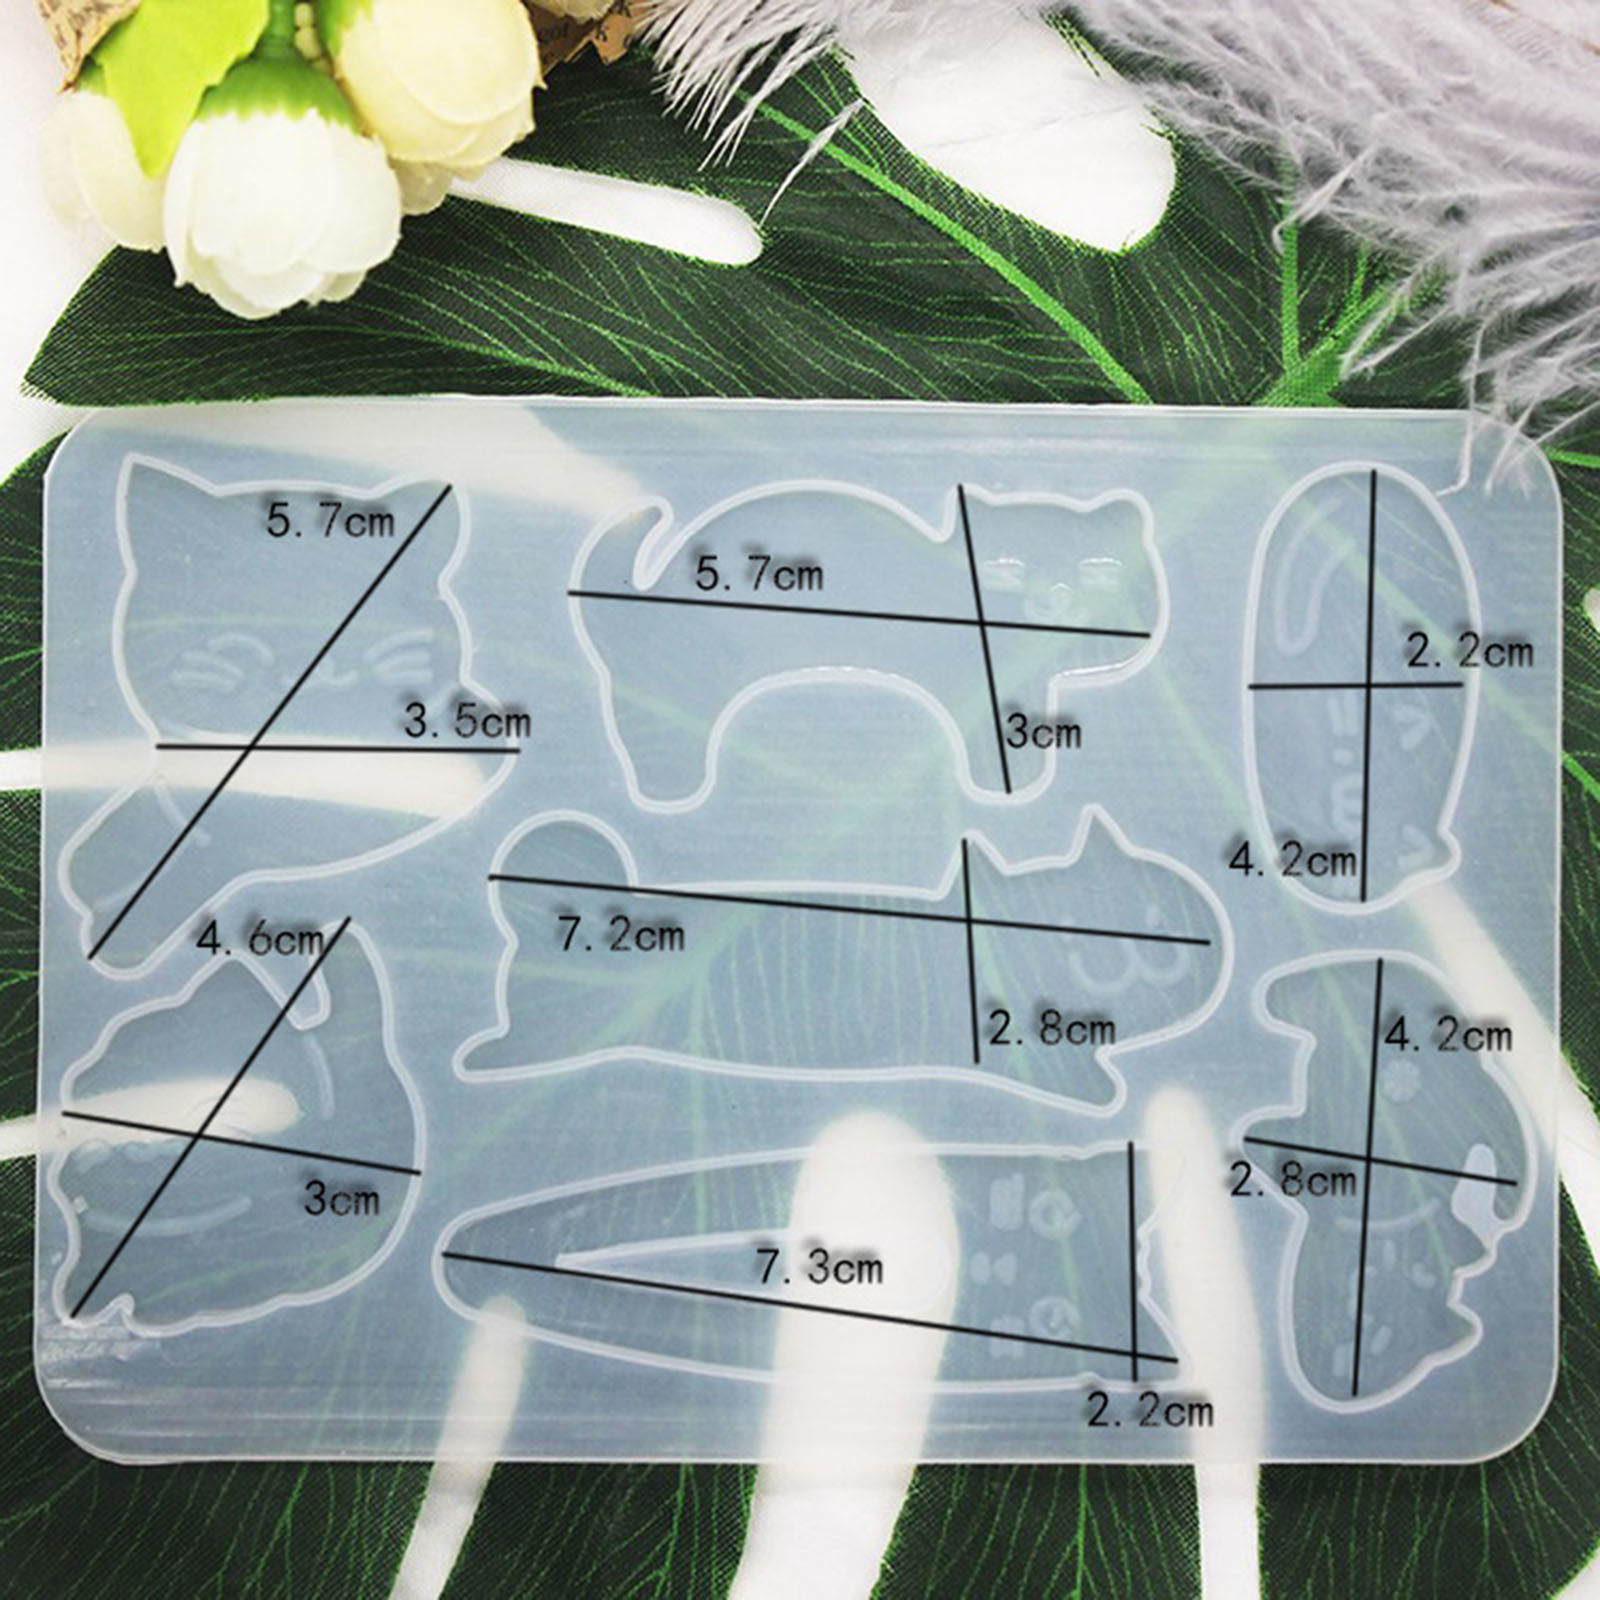 Picture of Silicone Resin Mold For Jewelry Making Hairpin Hair Accessories Cat Animal Transparent Clear 14.8cm x 10cm, 1 Piece